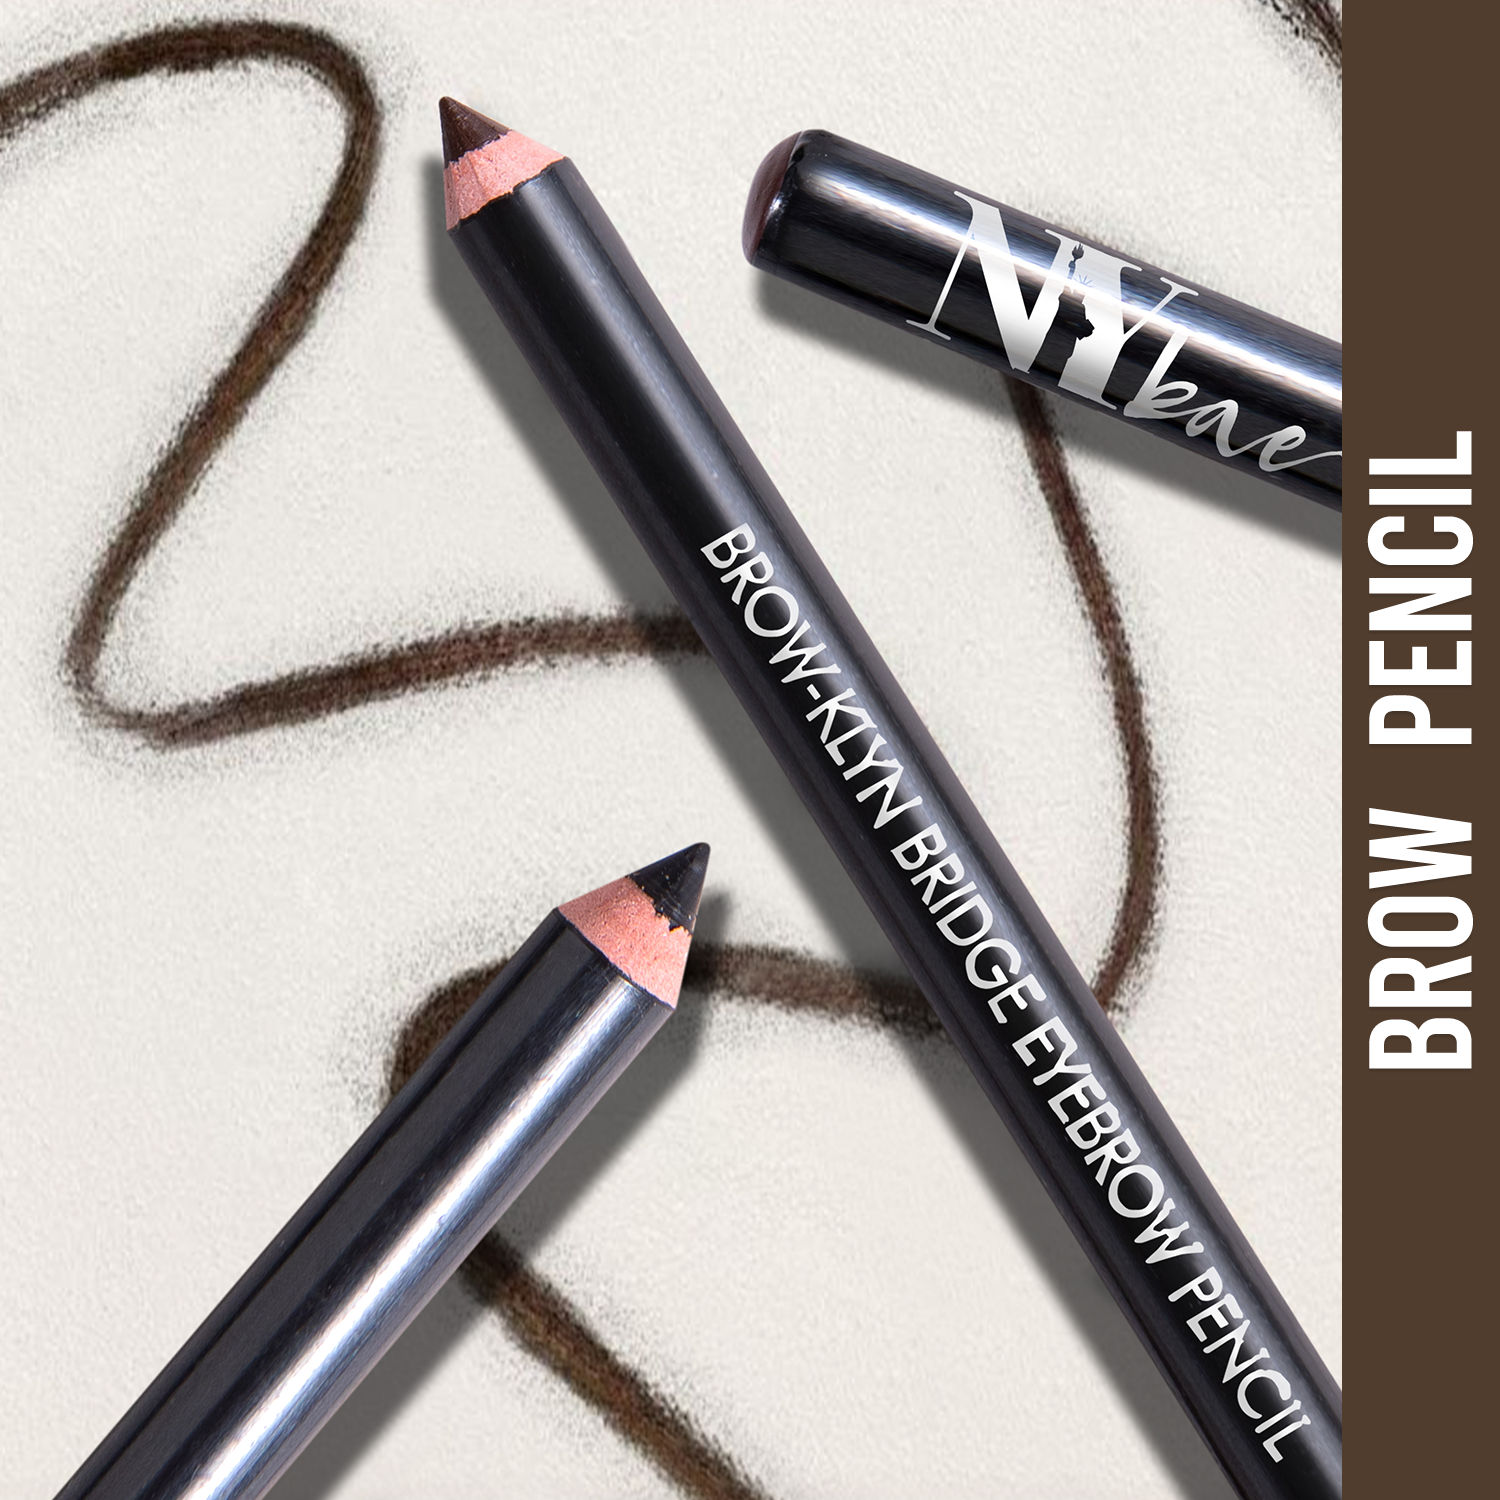 NY Bae Brow-klyn Bridge Eye Brow Pencil - Brown (1.4 g) | Enriched with Castor Oil & Vitamin E | Smudge Resistant | Easy To Use | Cruelty Free